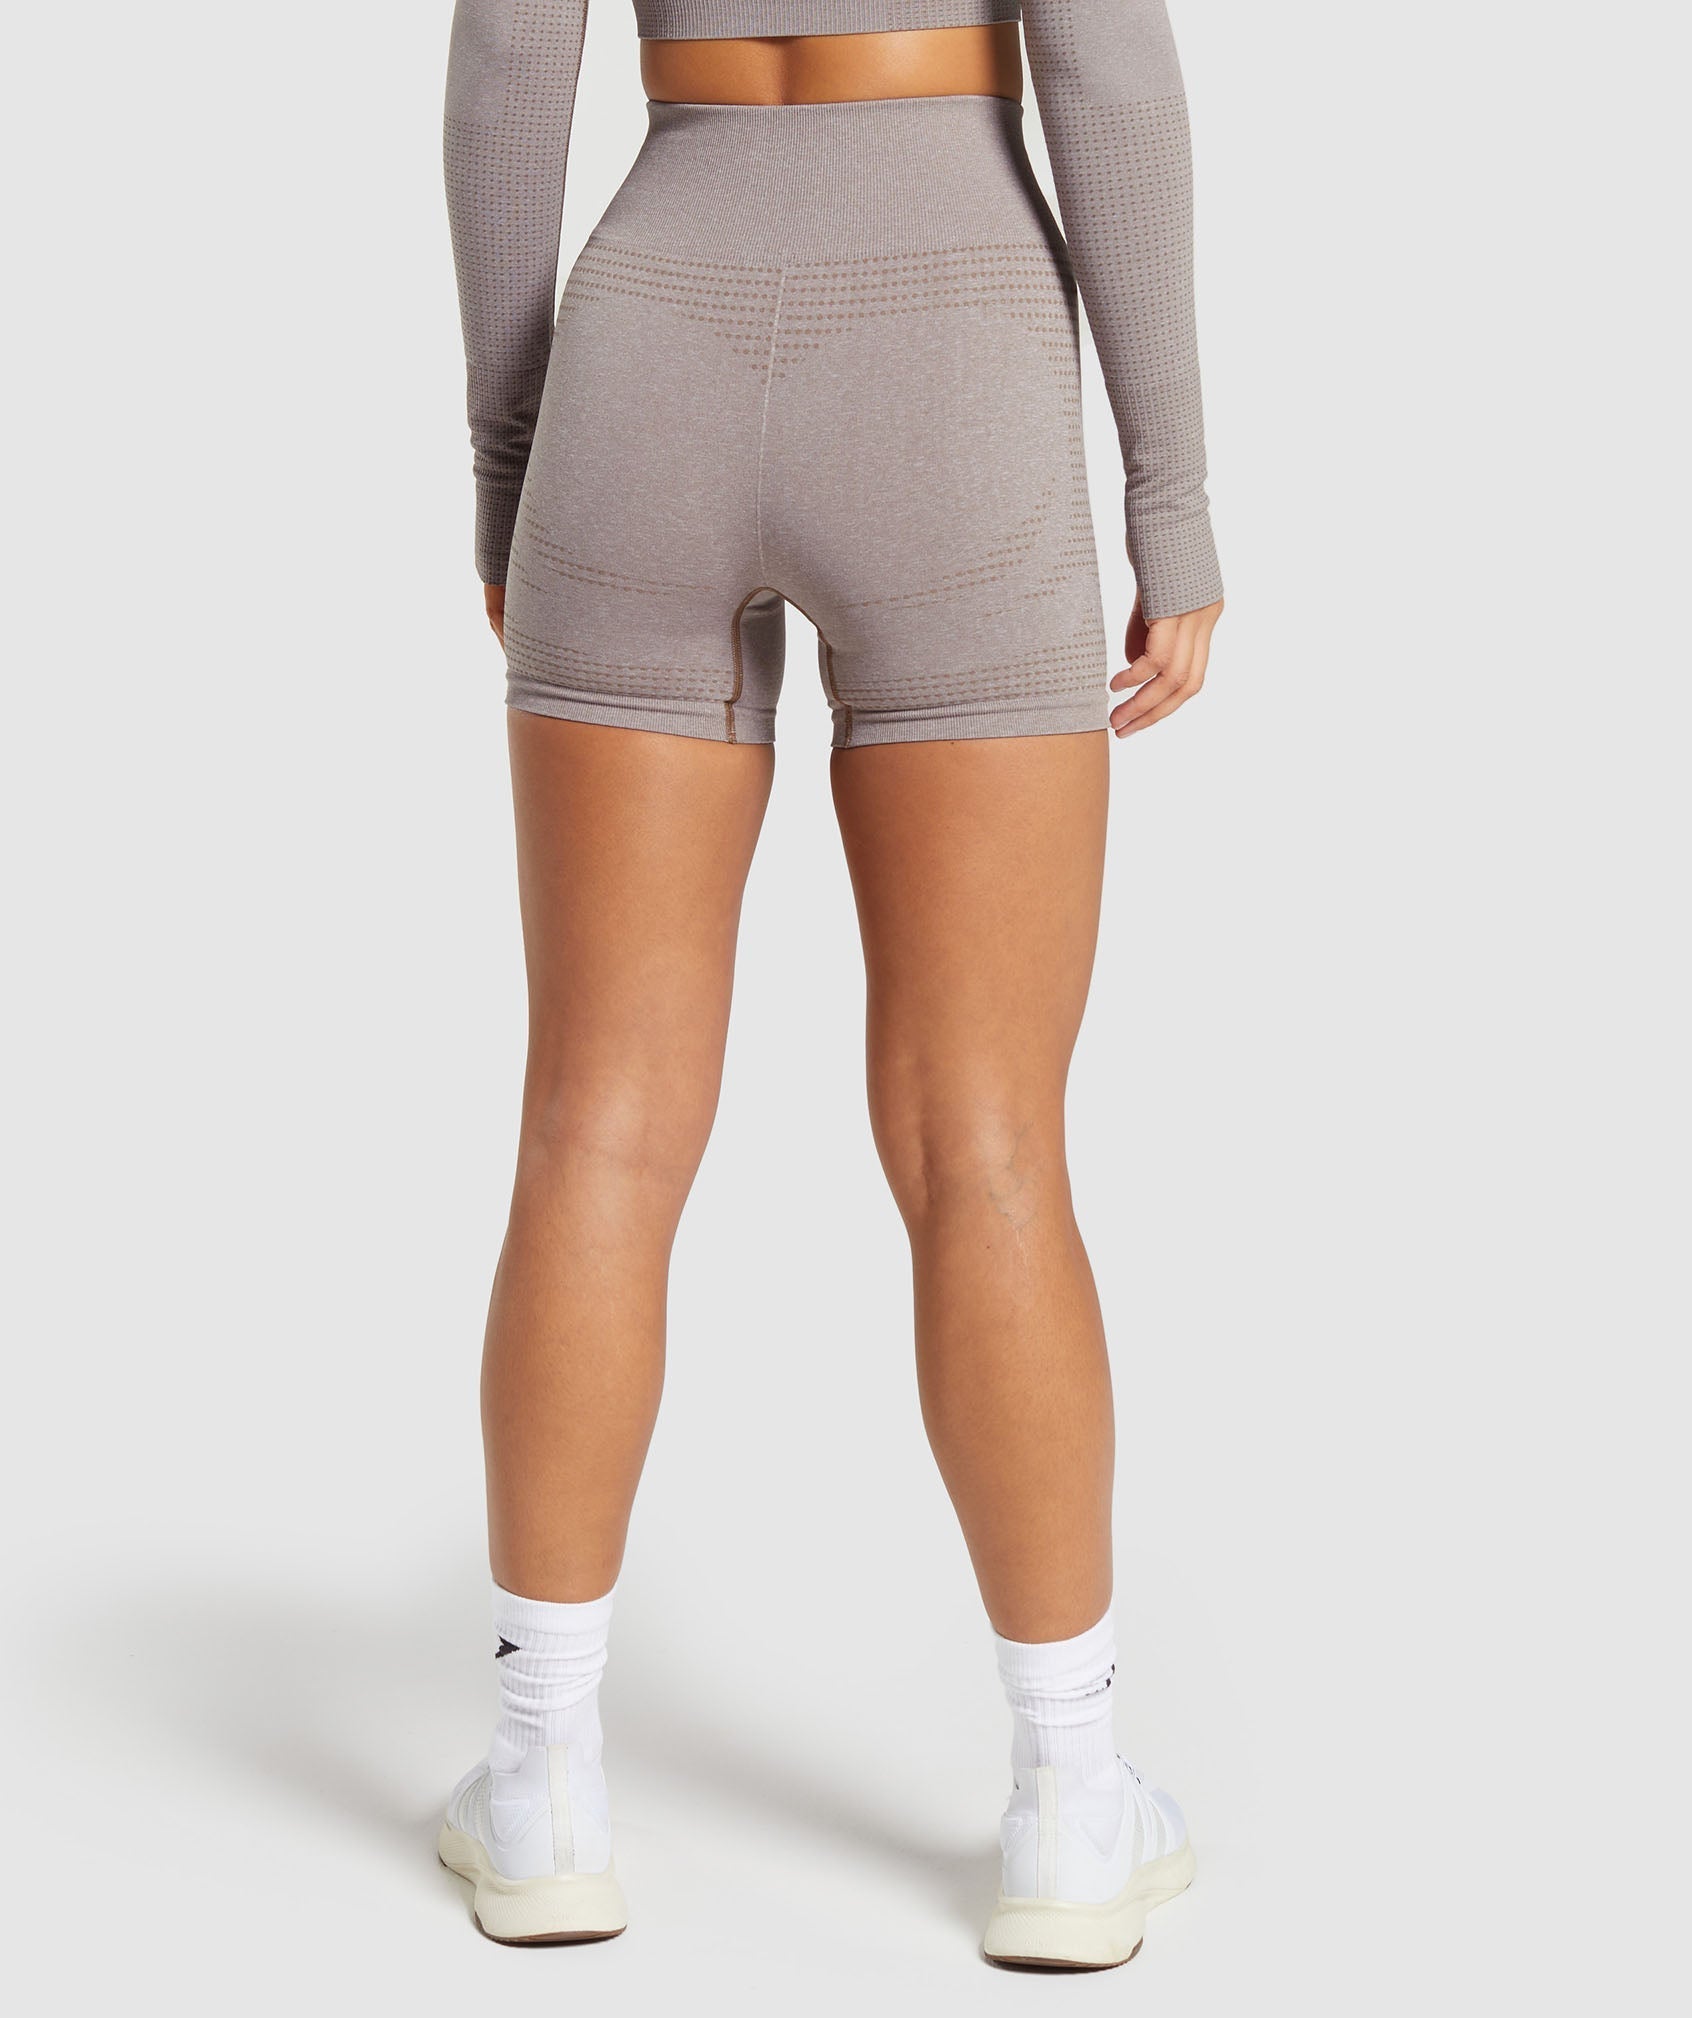 Vital Seamless 2.0 Shorts in Warm Taupe Marl - view 2